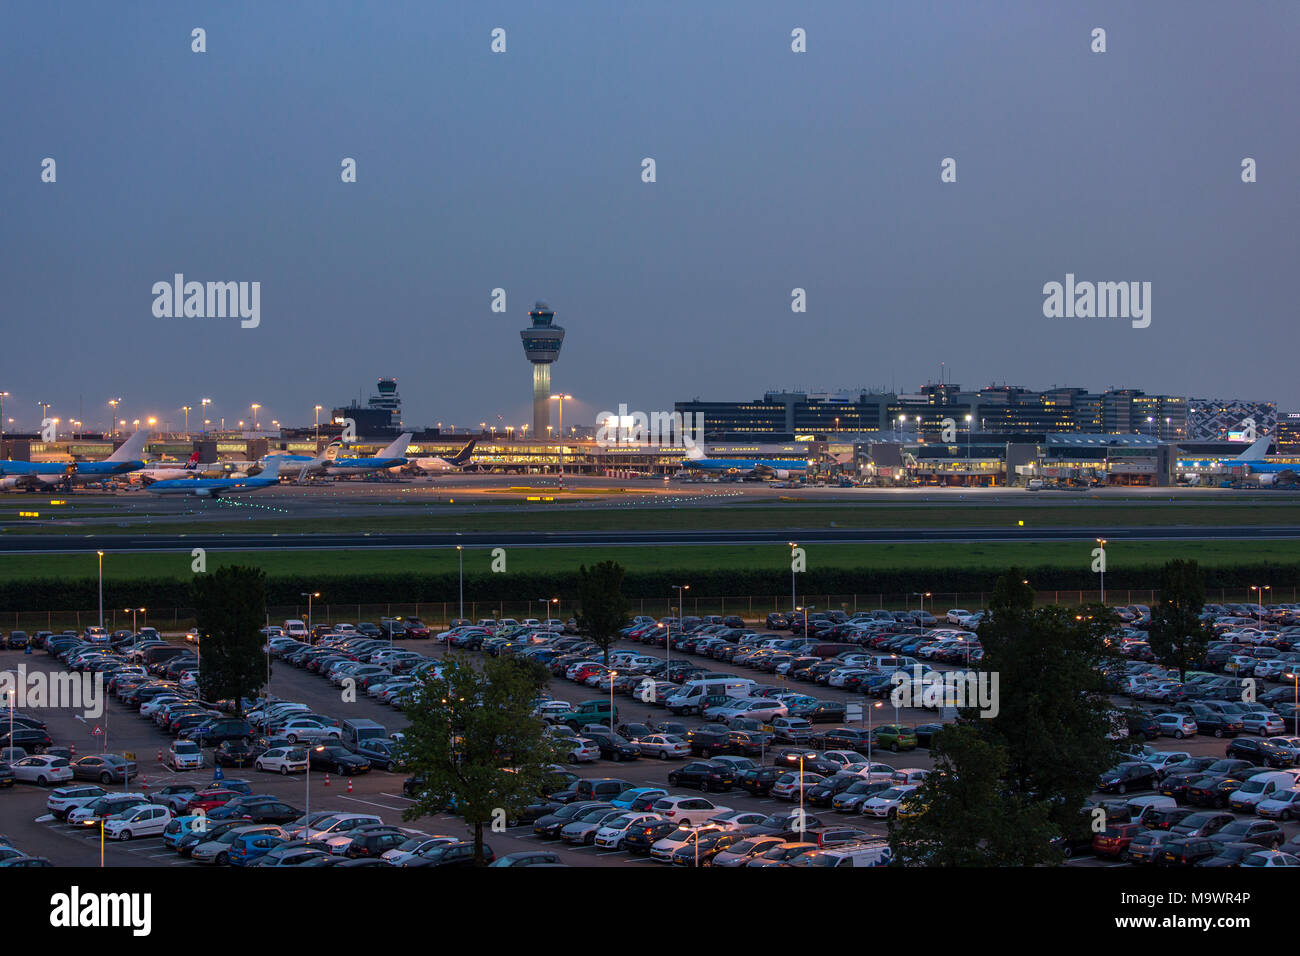 Start tower and airplanes in the evening on Schiphol airport in the Netherlands. Stock Photo